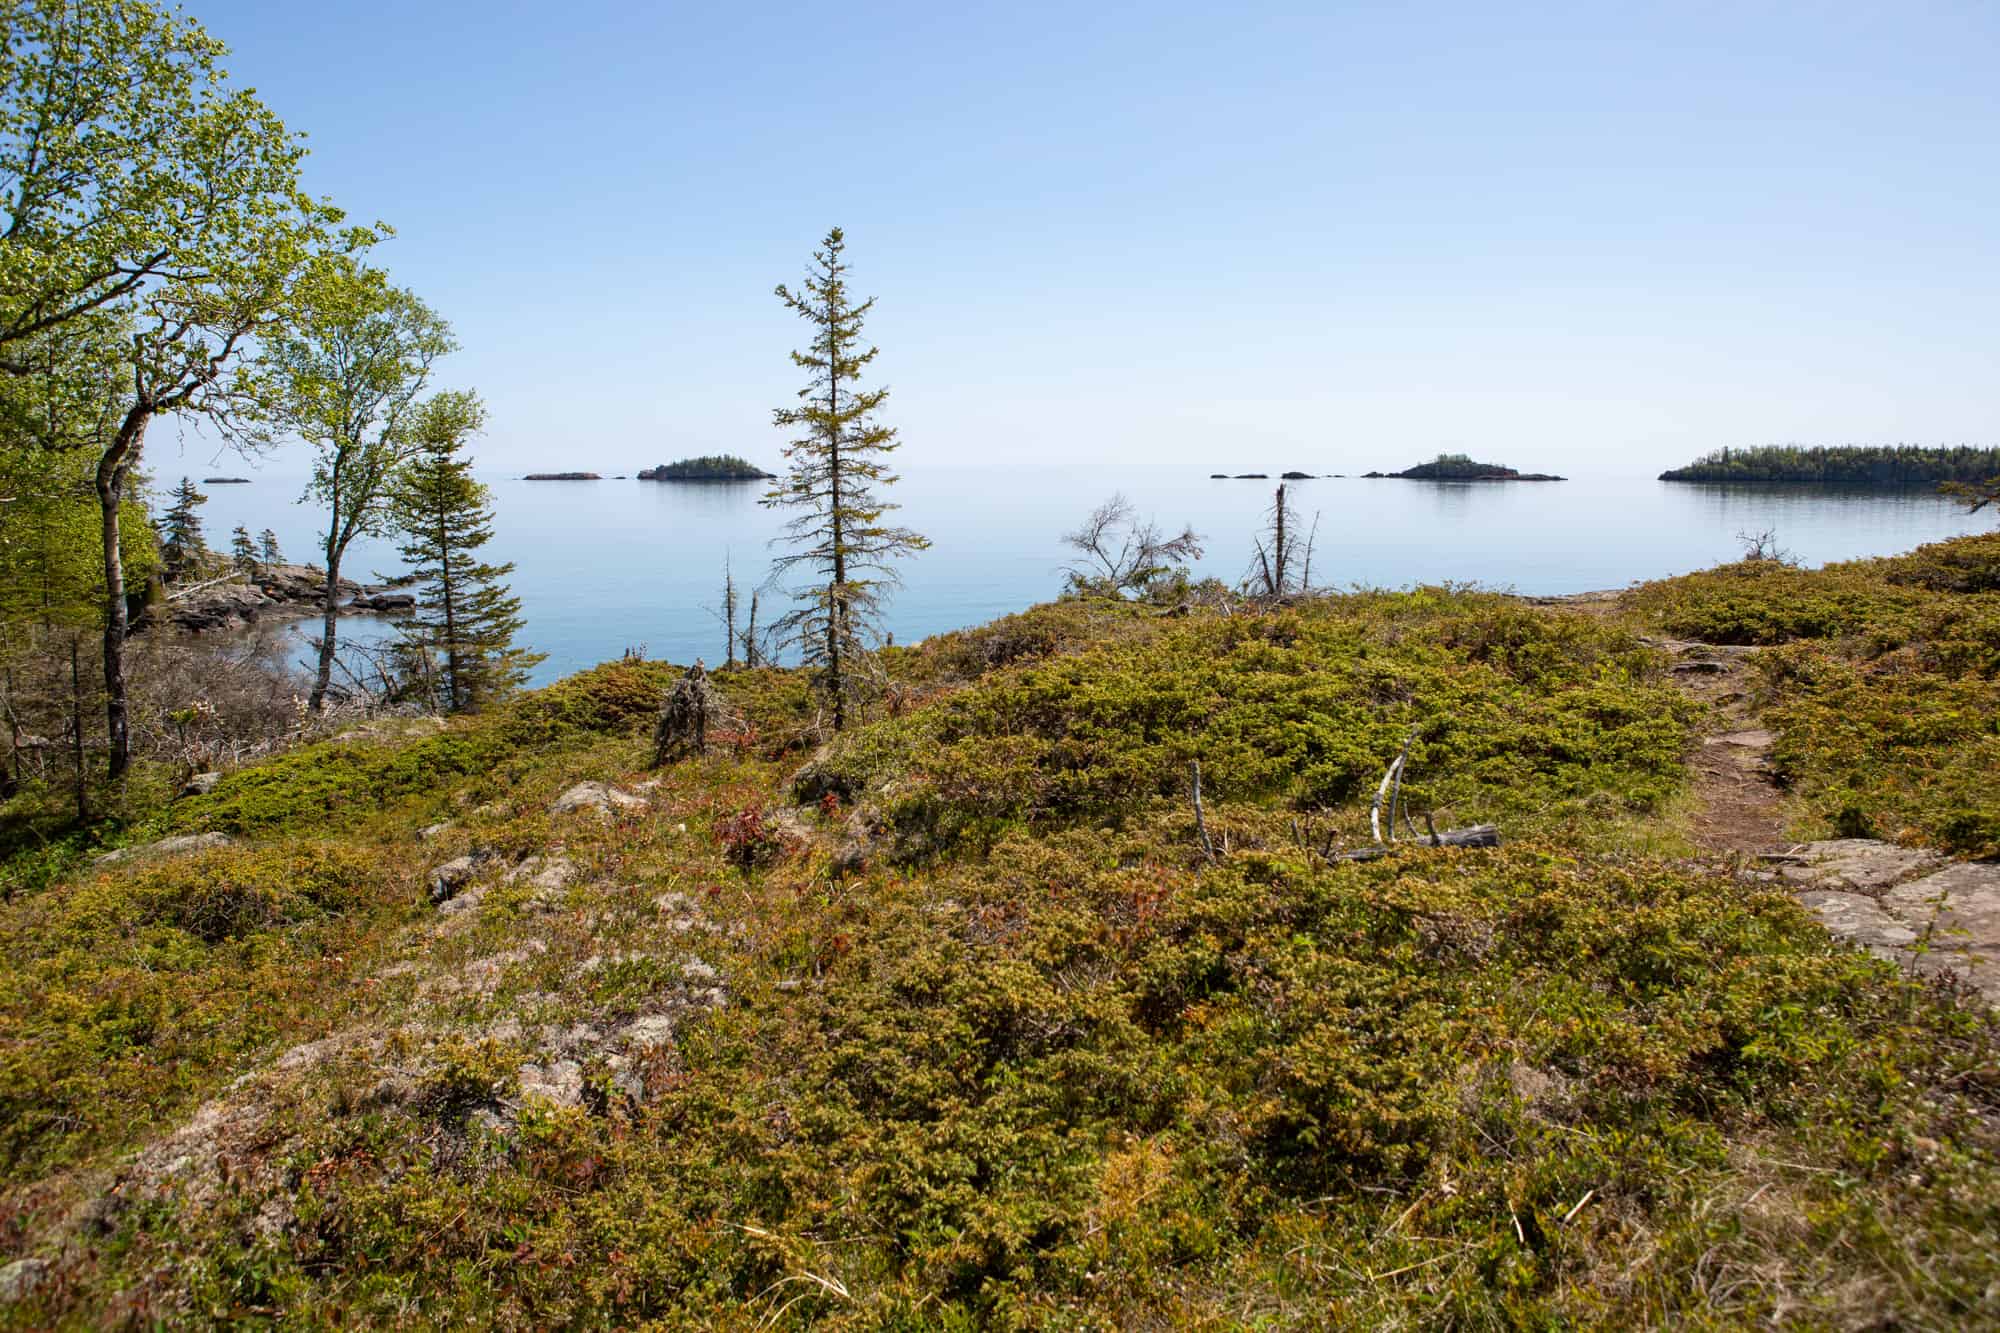 a view from the shore of isle royale national park, with some small rocky islands off shore in the sunshine